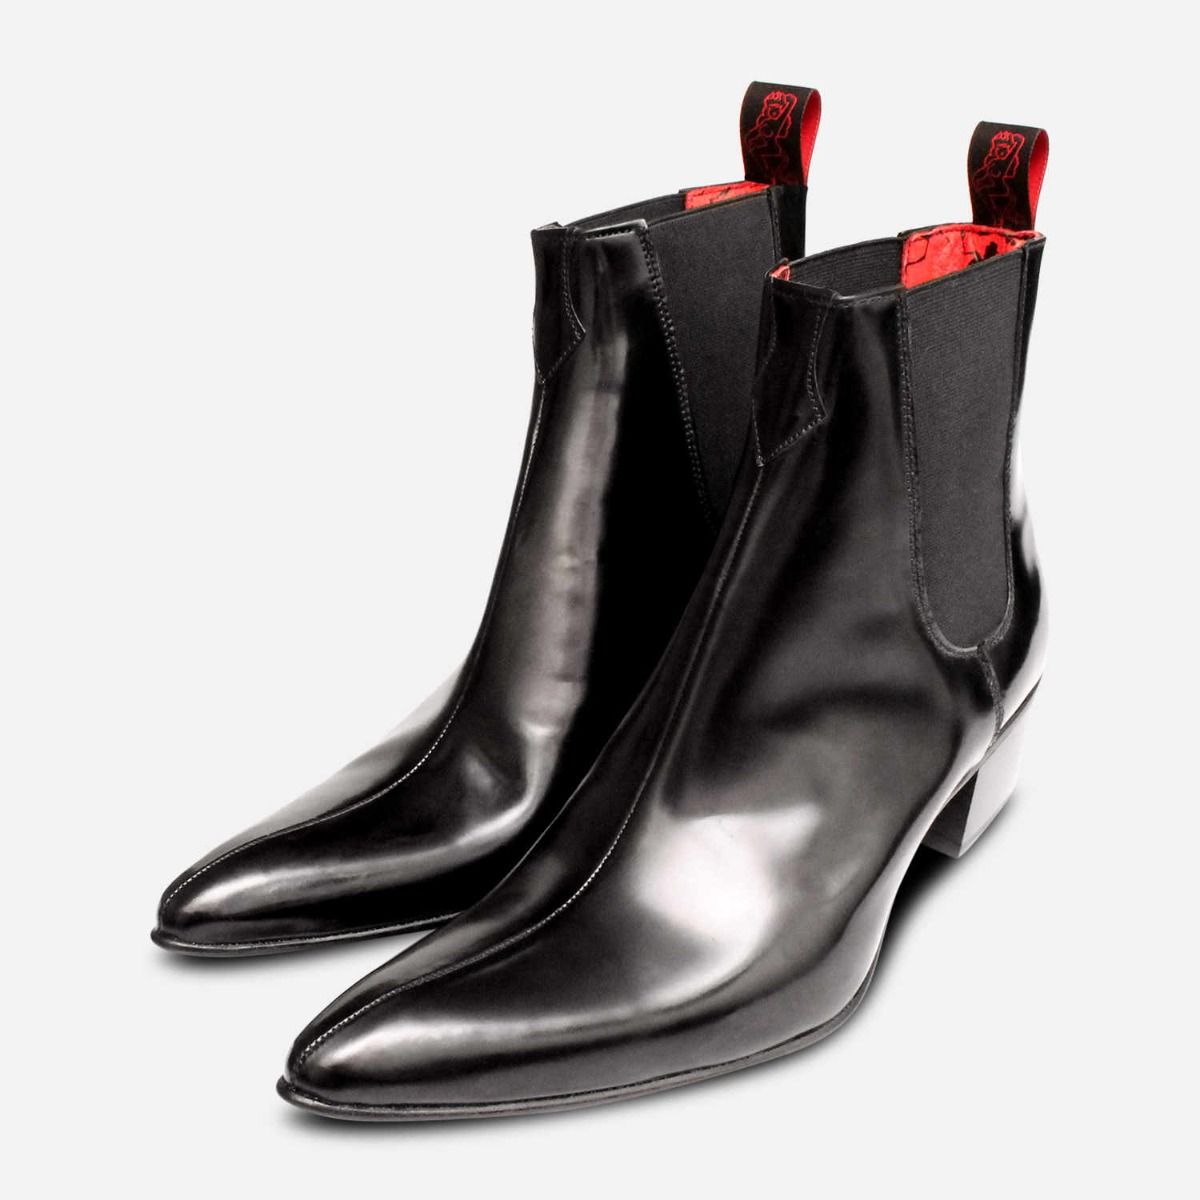 Jeffery Black Chelsea Boot with Red Sole